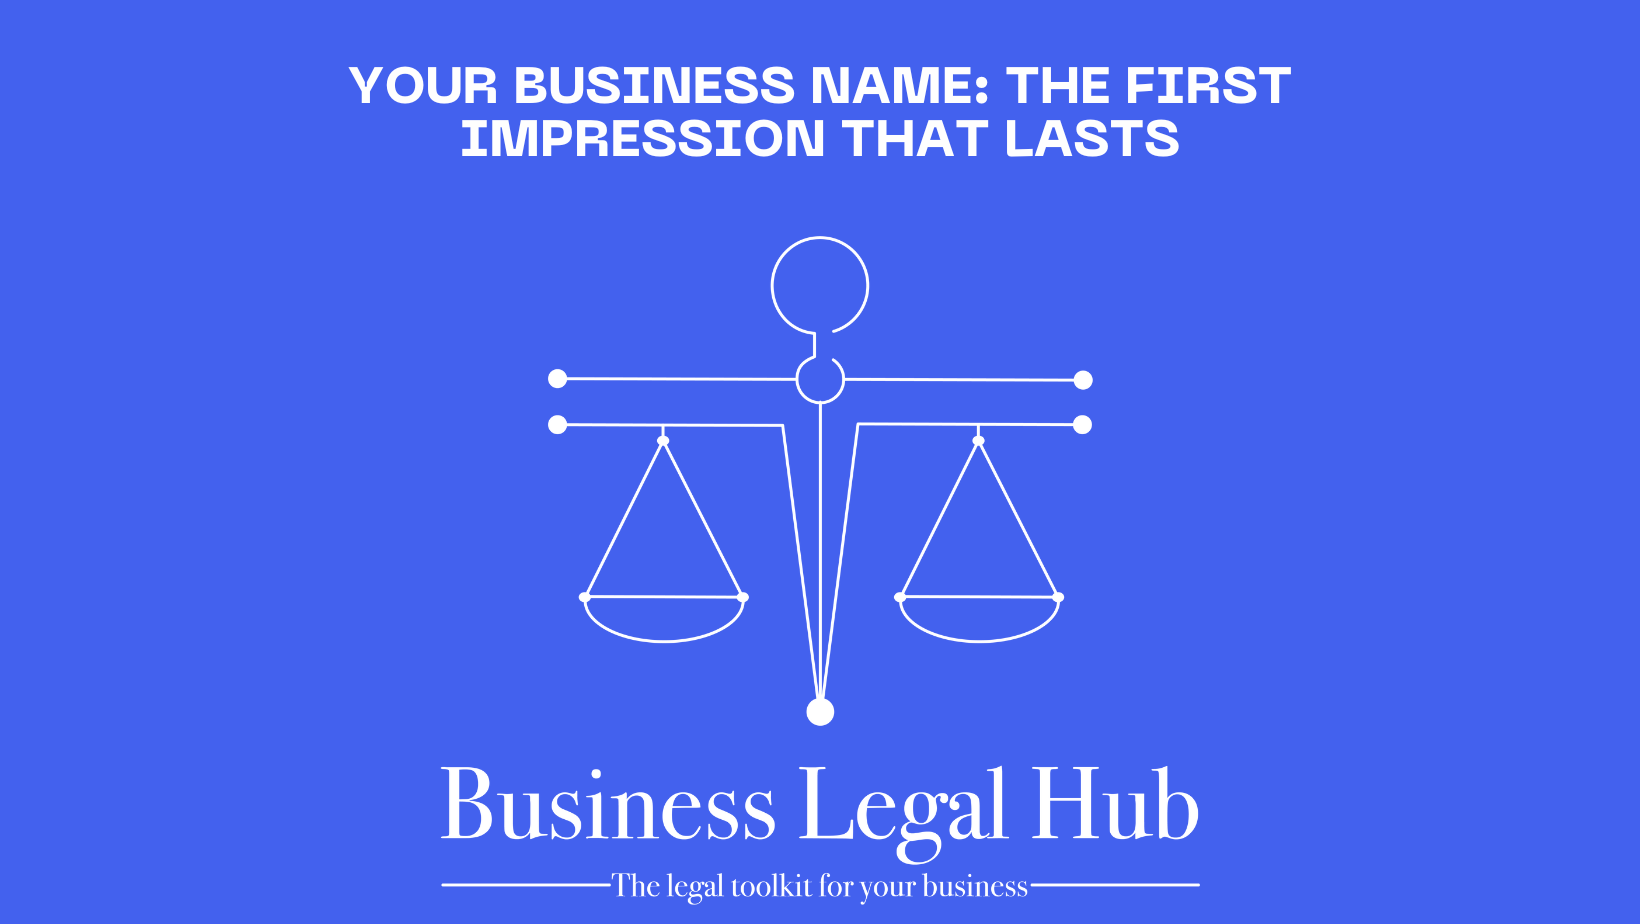 Your Business Name: The First Impression That Lasts